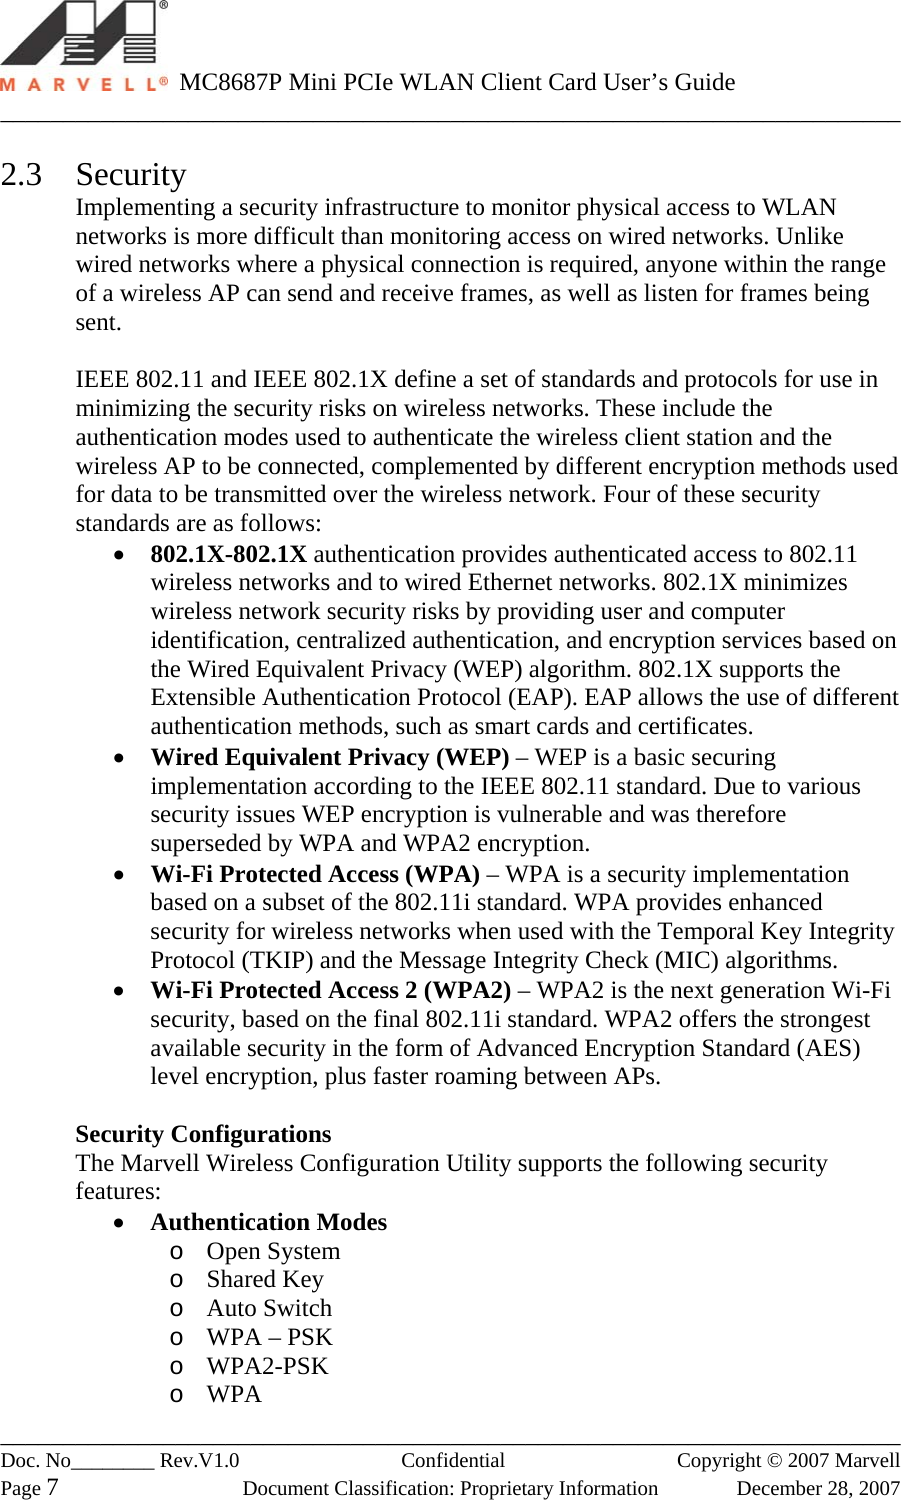   MC8687P Mini PCIe WLAN Client Card User’s Guide ________________________________________________________________________ ________________________________________________________________________ Doc. No________ Rev.V1.0   Confidential  Copyright © 2007 Marvell Page 7  Document Classification: Proprietary Information  December 28, 2007  2.3 Security Implementing a security infrastructure to monitor physical access to WLAN networks is more difficult than monitoring access on wired networks. Unlike wired networks where a physical connection is required, anyone within the range of a wireless AP can send and receive frames, as well as listen for frames being sent.  IEEE 802.11 and IEEE 802.1X define a set of standards and protocols for use in minimizing the security risks on wireless networks. These include the authentication modes used to authenticate the wireless client station and the wireless AP to be connected, complemented by different encryption methods used for data to be transmitted over the wireless network. Four of these security standards are as follows: •  802.1X-802.1X authentication provides authenticated access to 802.11 wireless networks and to wired Ethernet networks. 802.1X minimizes wireless network security risks by providing user and computer identification, centralized authentication, and encryption services based on the Wired Equivalent Privacy (WEP) algorithm. 802.1X supports the Extensible Authentication Protocol (EAP). EAP allows the use of different authentication methods, such as smart cards and certificates. •  Wired Equivalent Privacy (WEP) – WEP is a basic securing implementation according to the IEEE 802.11 standard. Due to various security issues WEP encryption is vulnerable and was therefore superseded by WPA and WPA2 encryption. •  Wi-Fi Protected Access (WPA) – WPA is a security implementation based on a subset of the 802.11i standard. WPA provides enhanced security for wireless networks when used with the Temporal Key Integrity Protocol (TKIP) and the Message Integrity Check (MIC) algorithms.  •  Wi-Fi Protected Access 2 (WPA2) – WPA2 is the next generation Wi-Fi security, based on the final 802.11i standard. WPA2 offers the strongest available security in the form of Advanced Encryption Standard (AES) level encryption, plus faster roaming between APs.  Security Configurations The Marvell Wireless Configuration Utility supports the following security features: •  Authentication Modes o  Open System o  Shared Key o  Auto Switch o  WPA – PSK o  WPA2-PSK o  WPA 